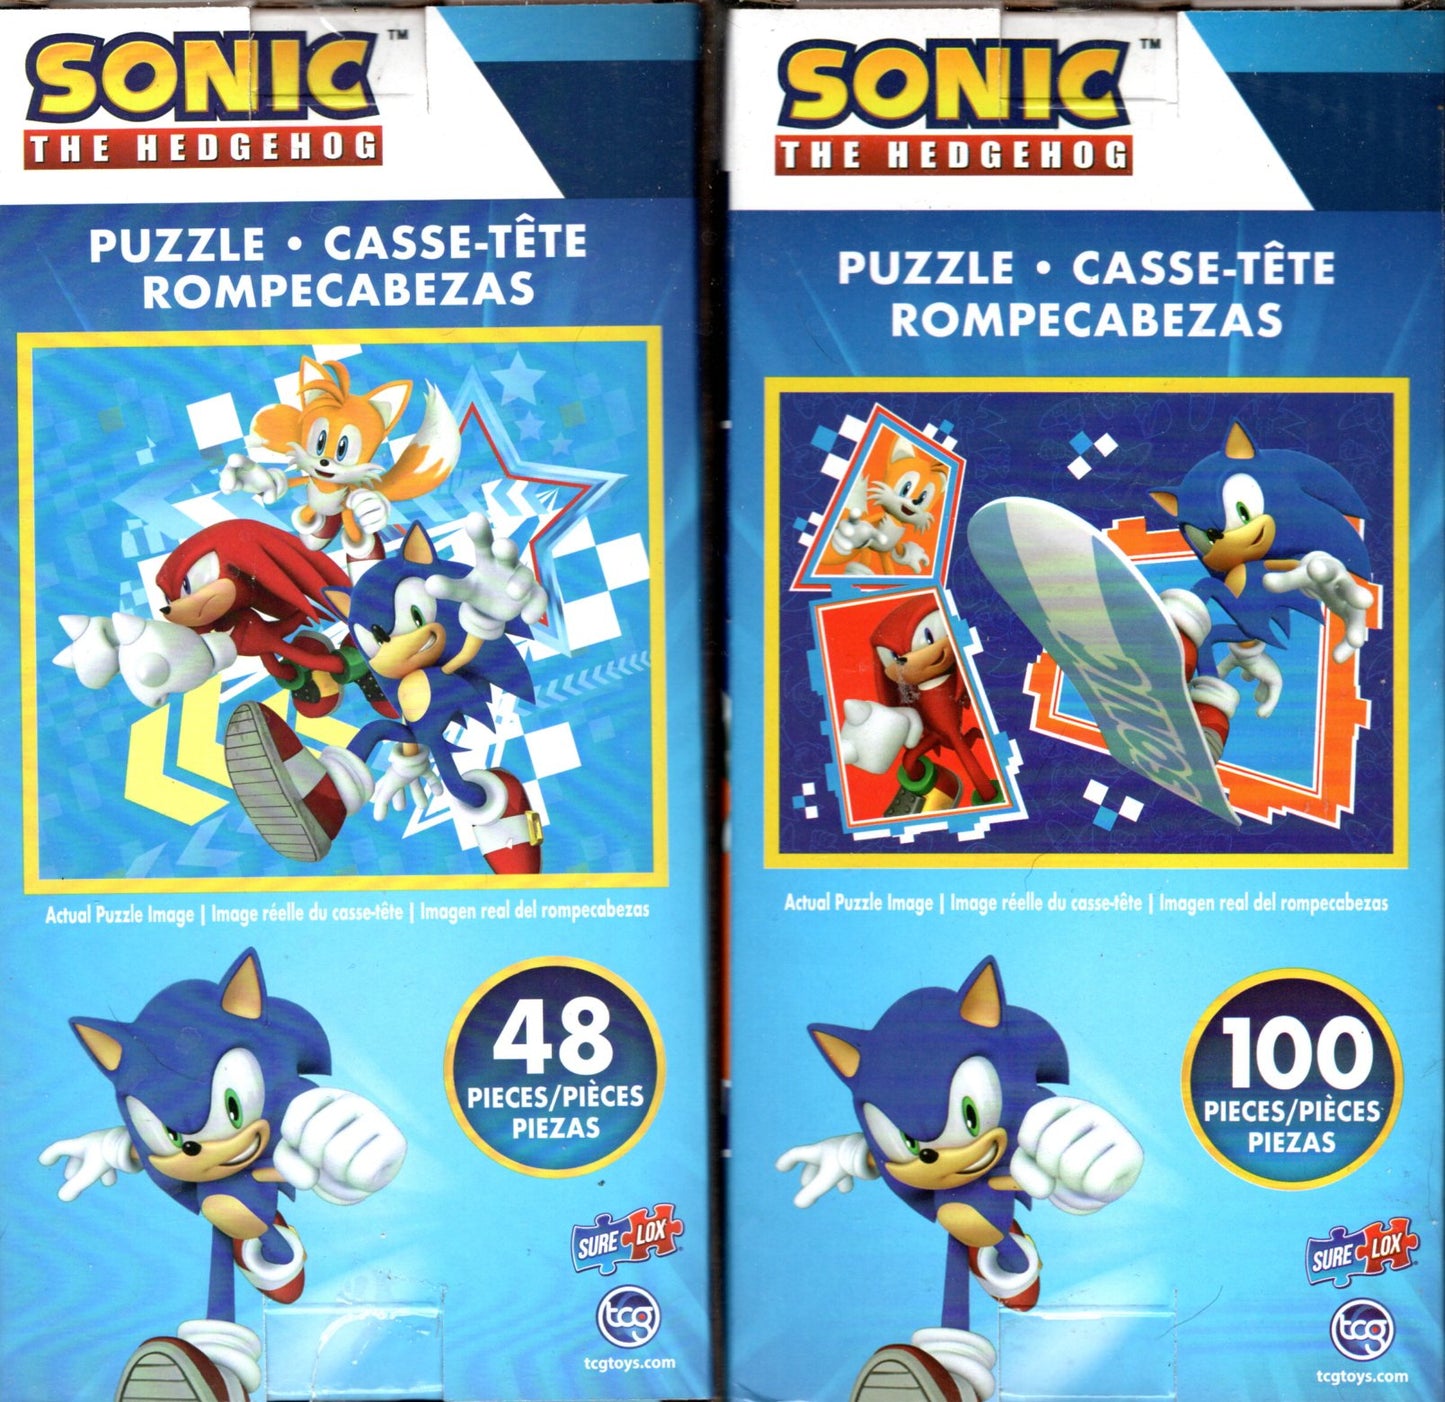 Sonic The Hedgehog - 48 + 100 Pieces Jigsaw Puzzle (Set of 2)